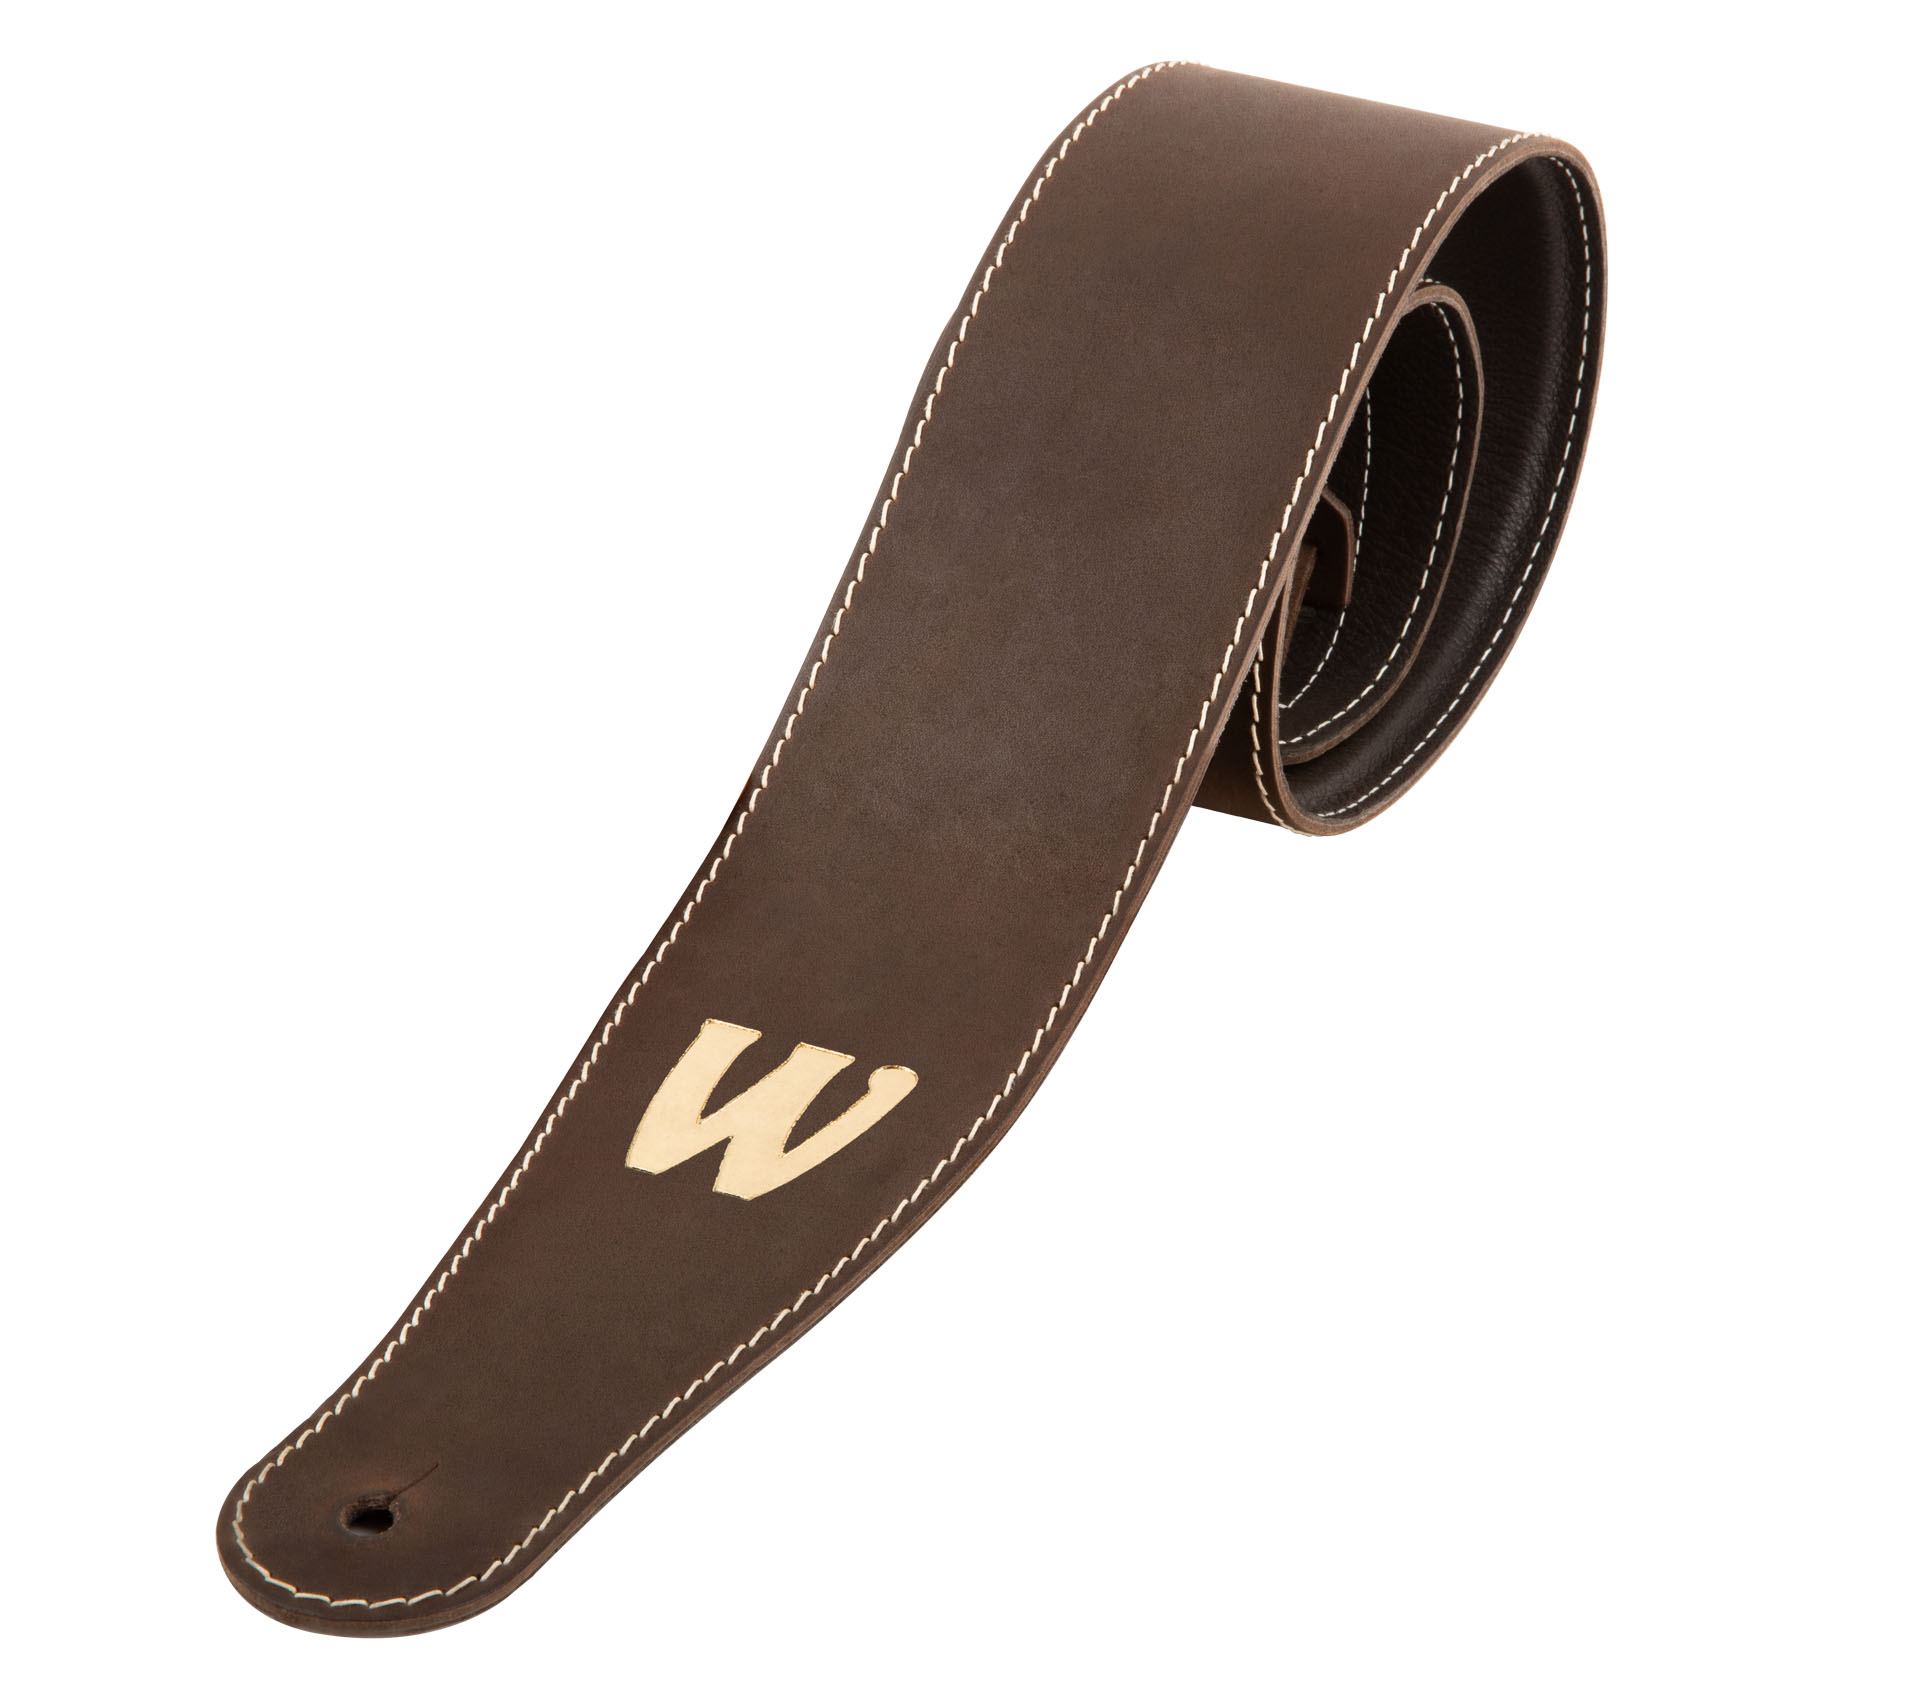 Warwick Teambuilt Genuine Leather Bass Strap - Brown, Gold Embossing